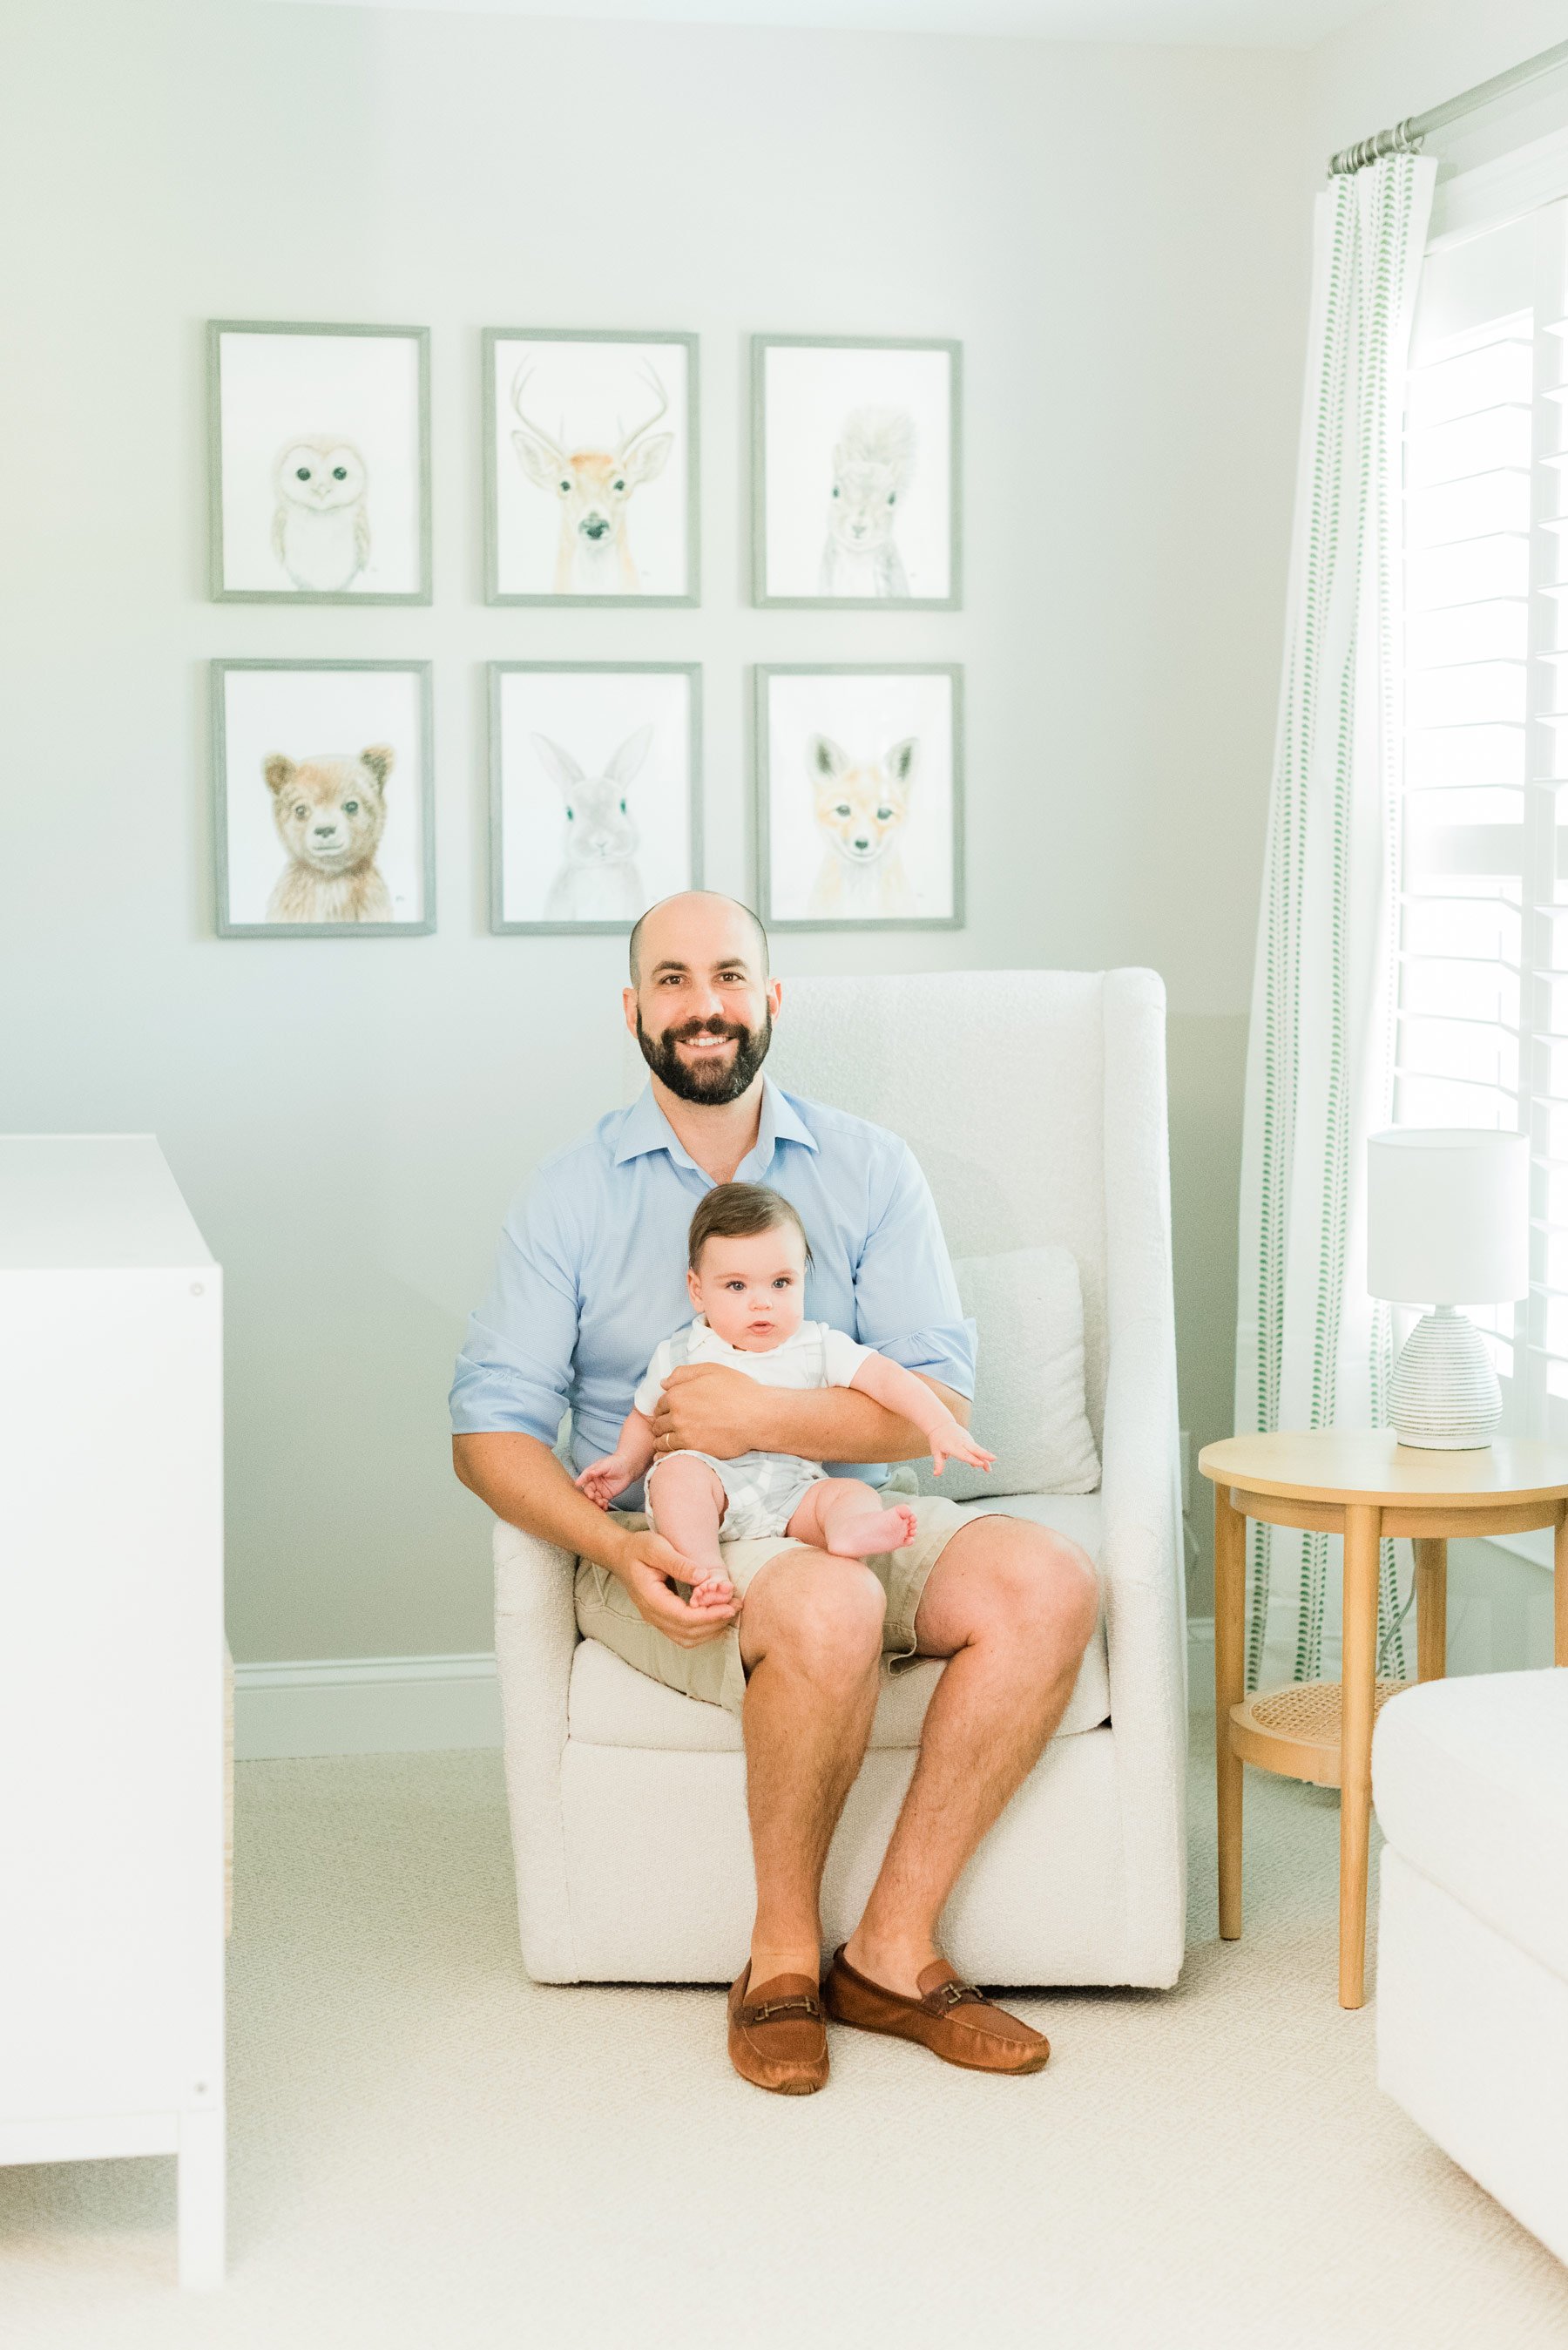  A sweet dad sits with his young son in the son’s nursery. Jacquie Erickson photography takes pictures that last a lifetime.&nbsp; #inhomeportraitsessions #familyphotos #portraitphotography #atlantaphotographer #jacquieerickson #fayettevillefamilypho